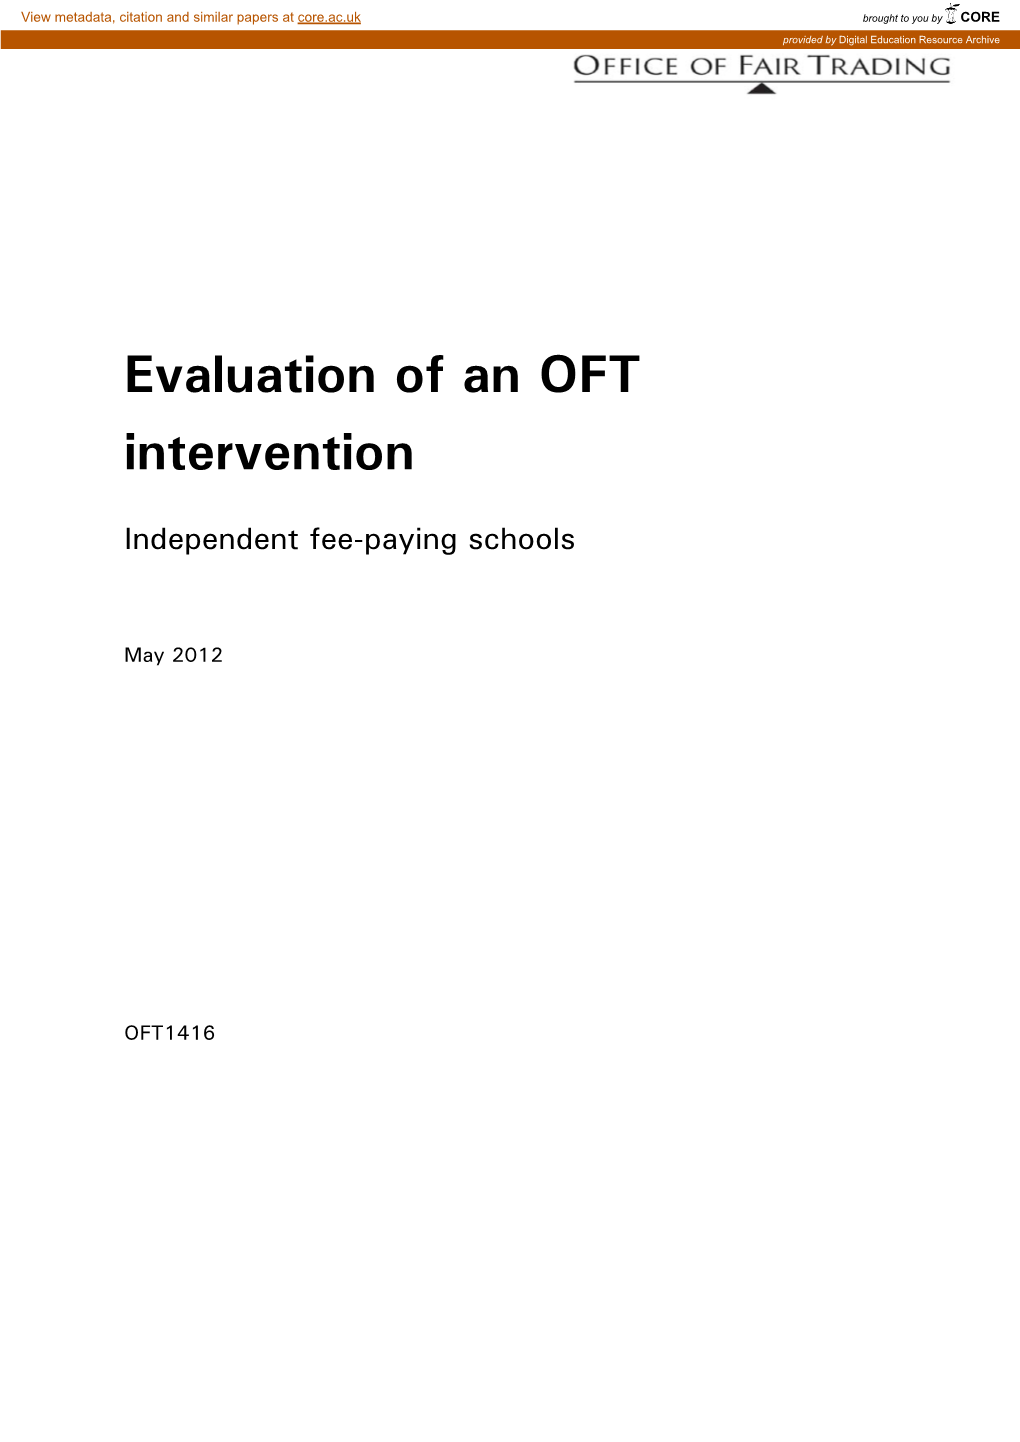 Independent Fee-Paying Schools